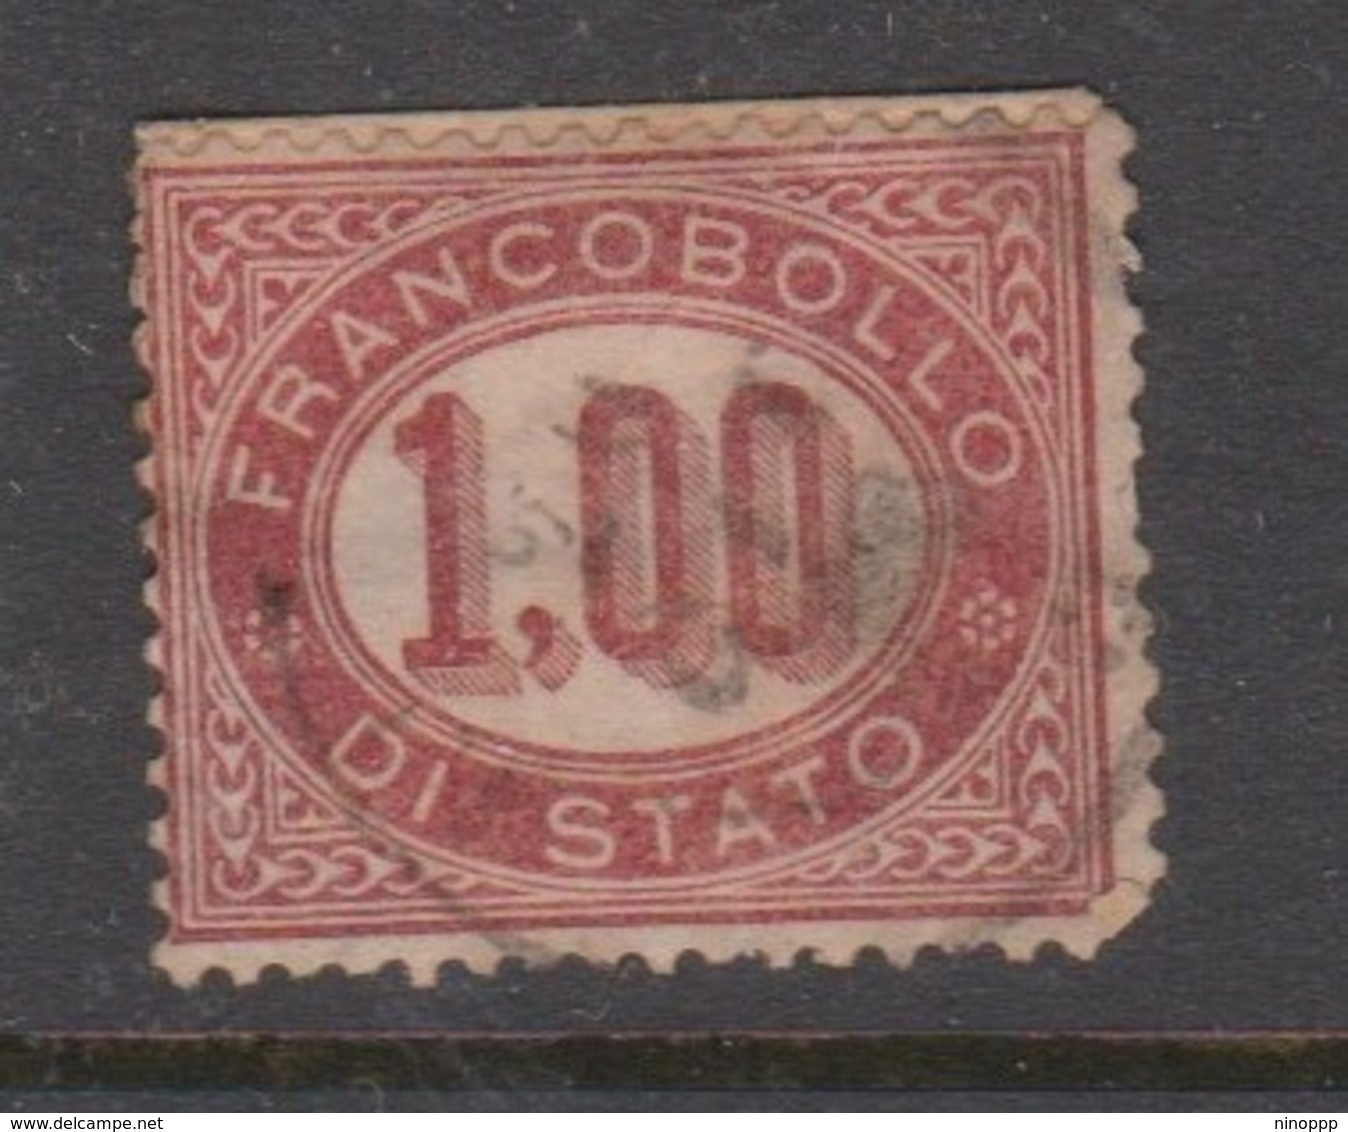 Italy O 5 1875 Official Stamp,lire 1 Lake,used - Officials